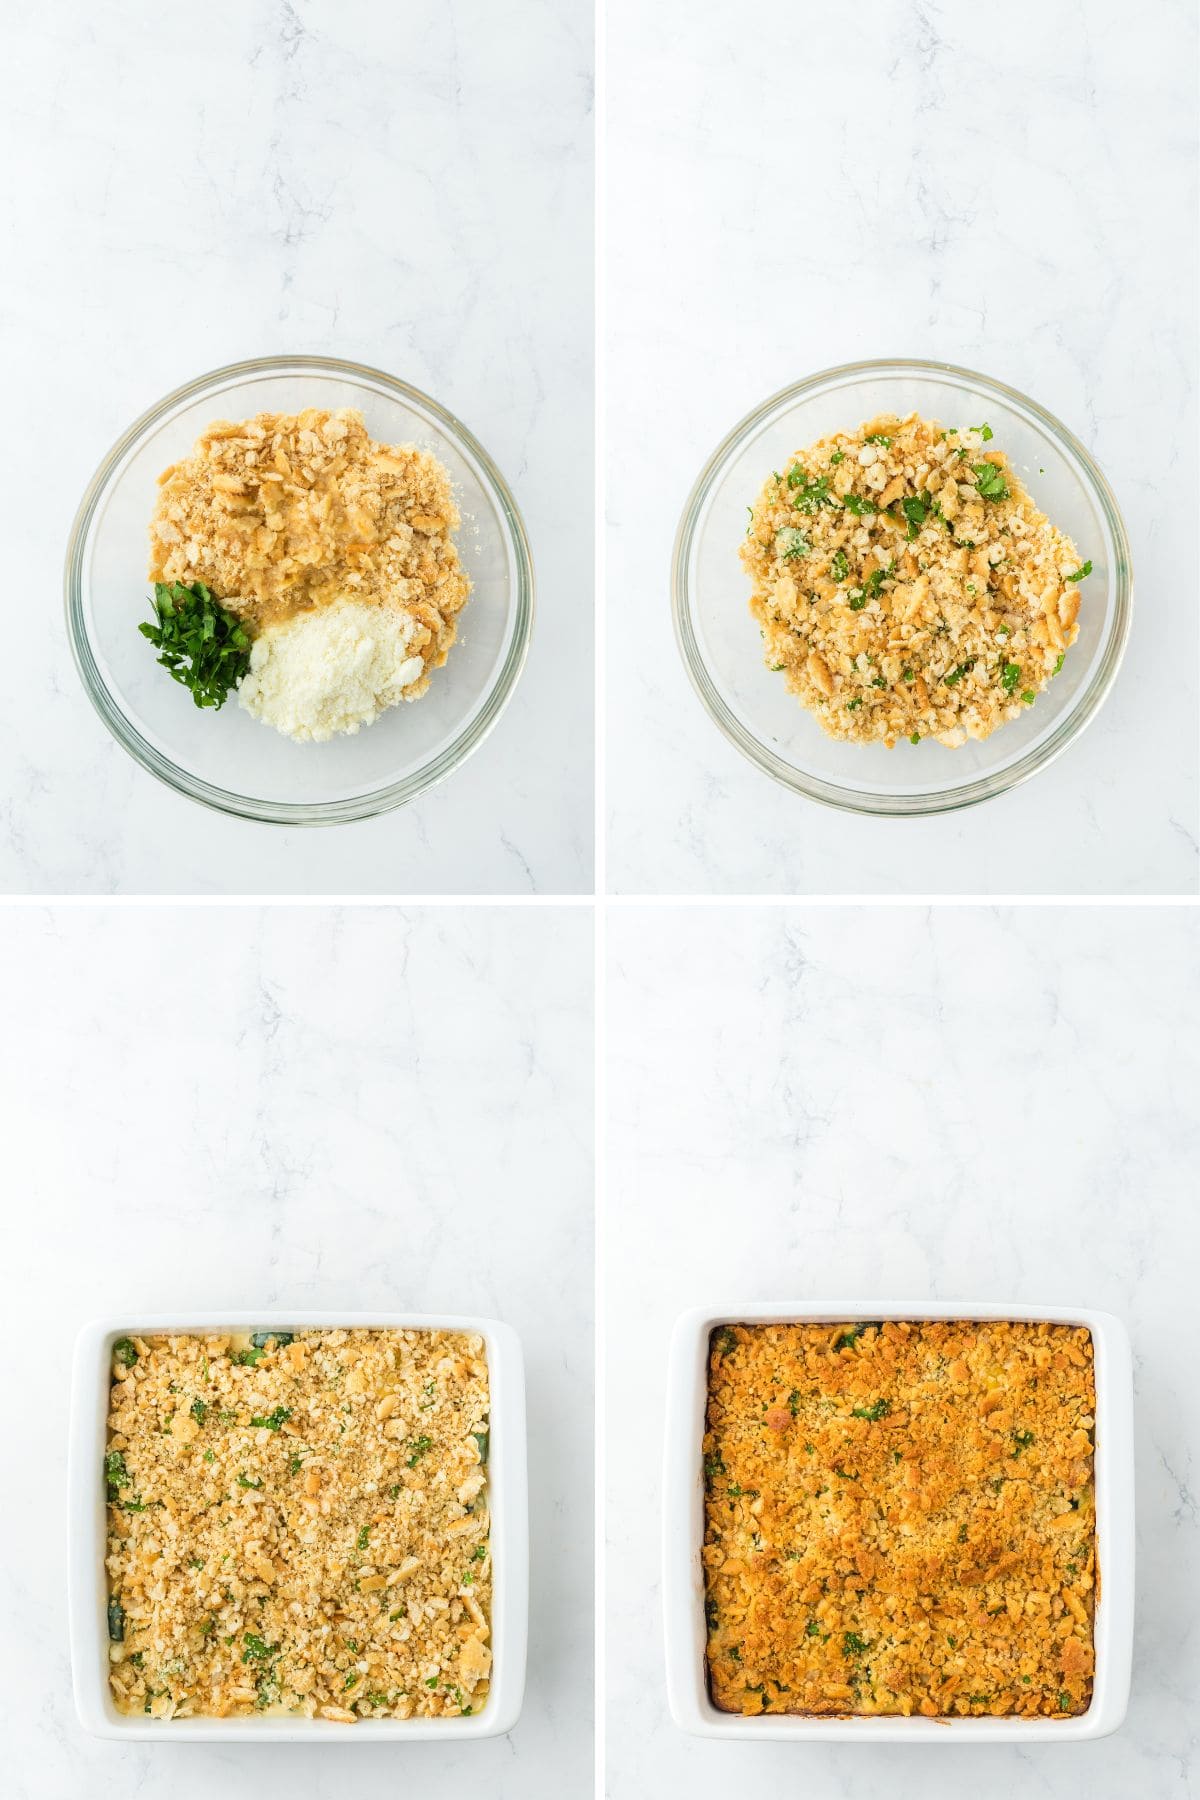 A step by step image collage on how to make squash casserole, with mixing the ingredients for the cracker topping, sprinkling the topping on top of the casserole, and baking the casserole